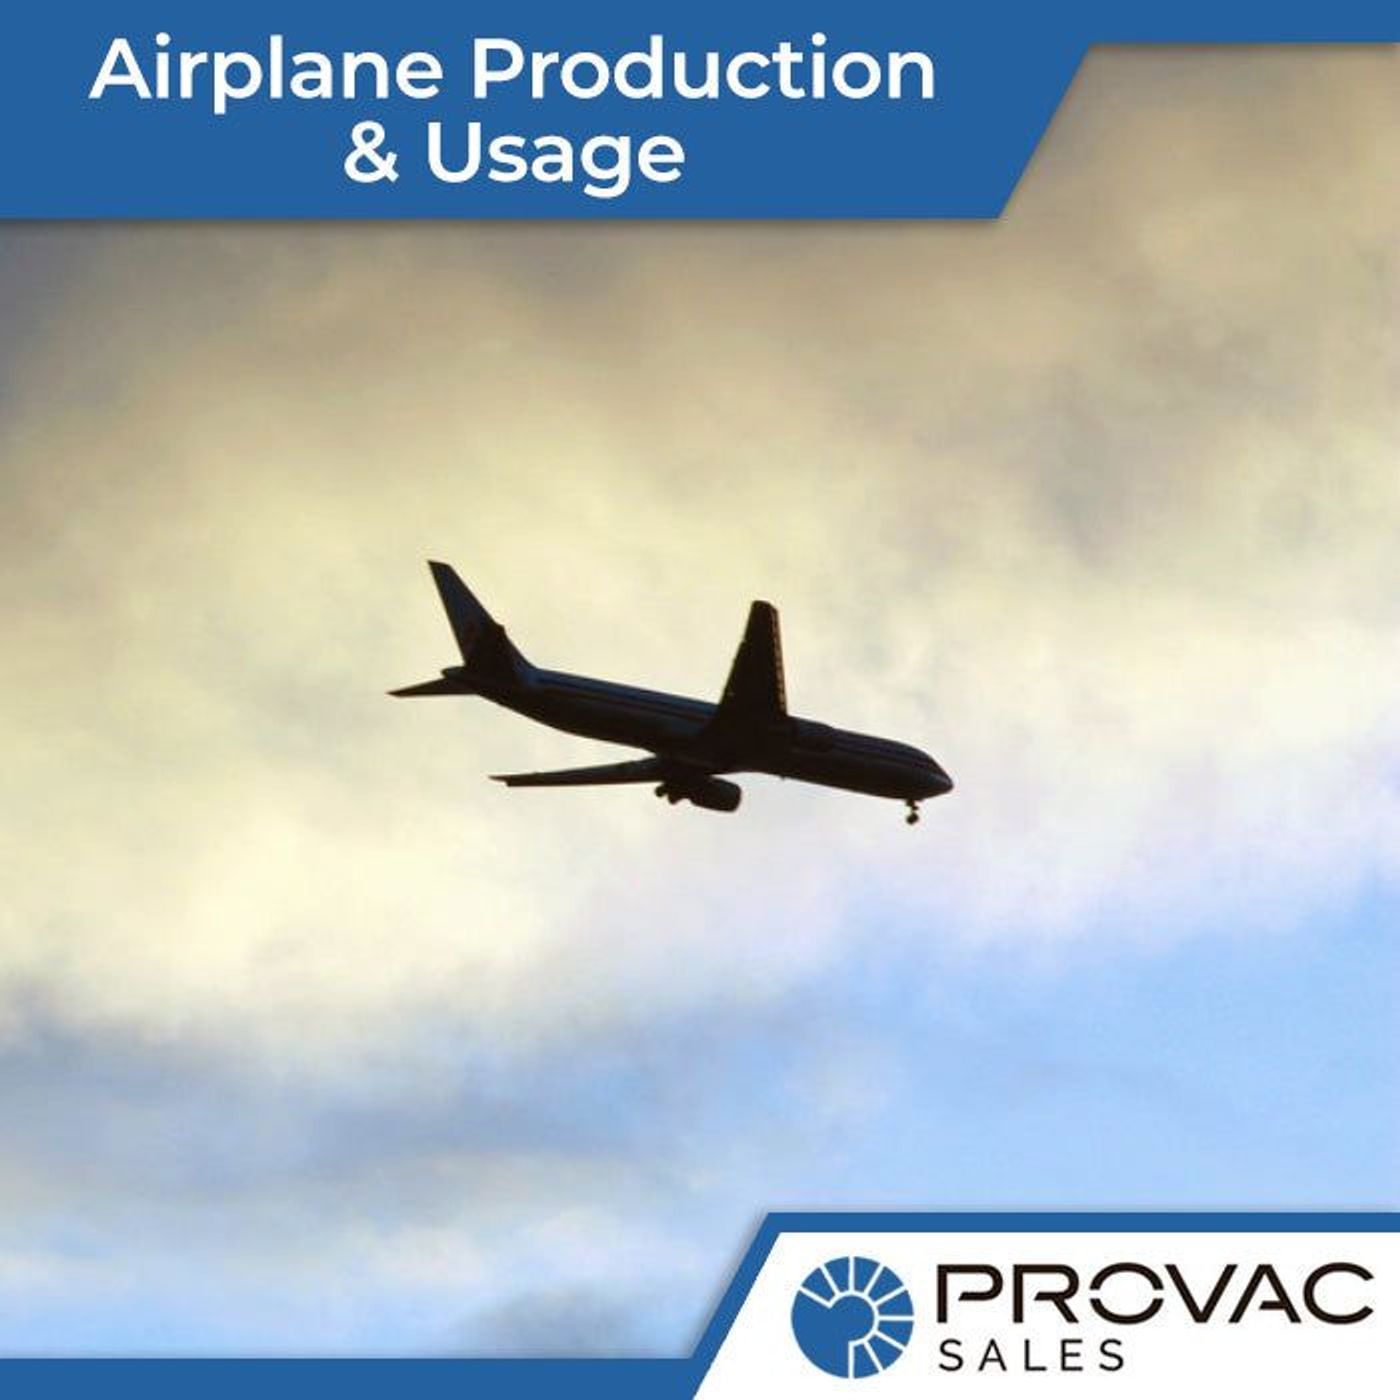 How Vacuum Pumps Help With the Production and Usage of Airplanes